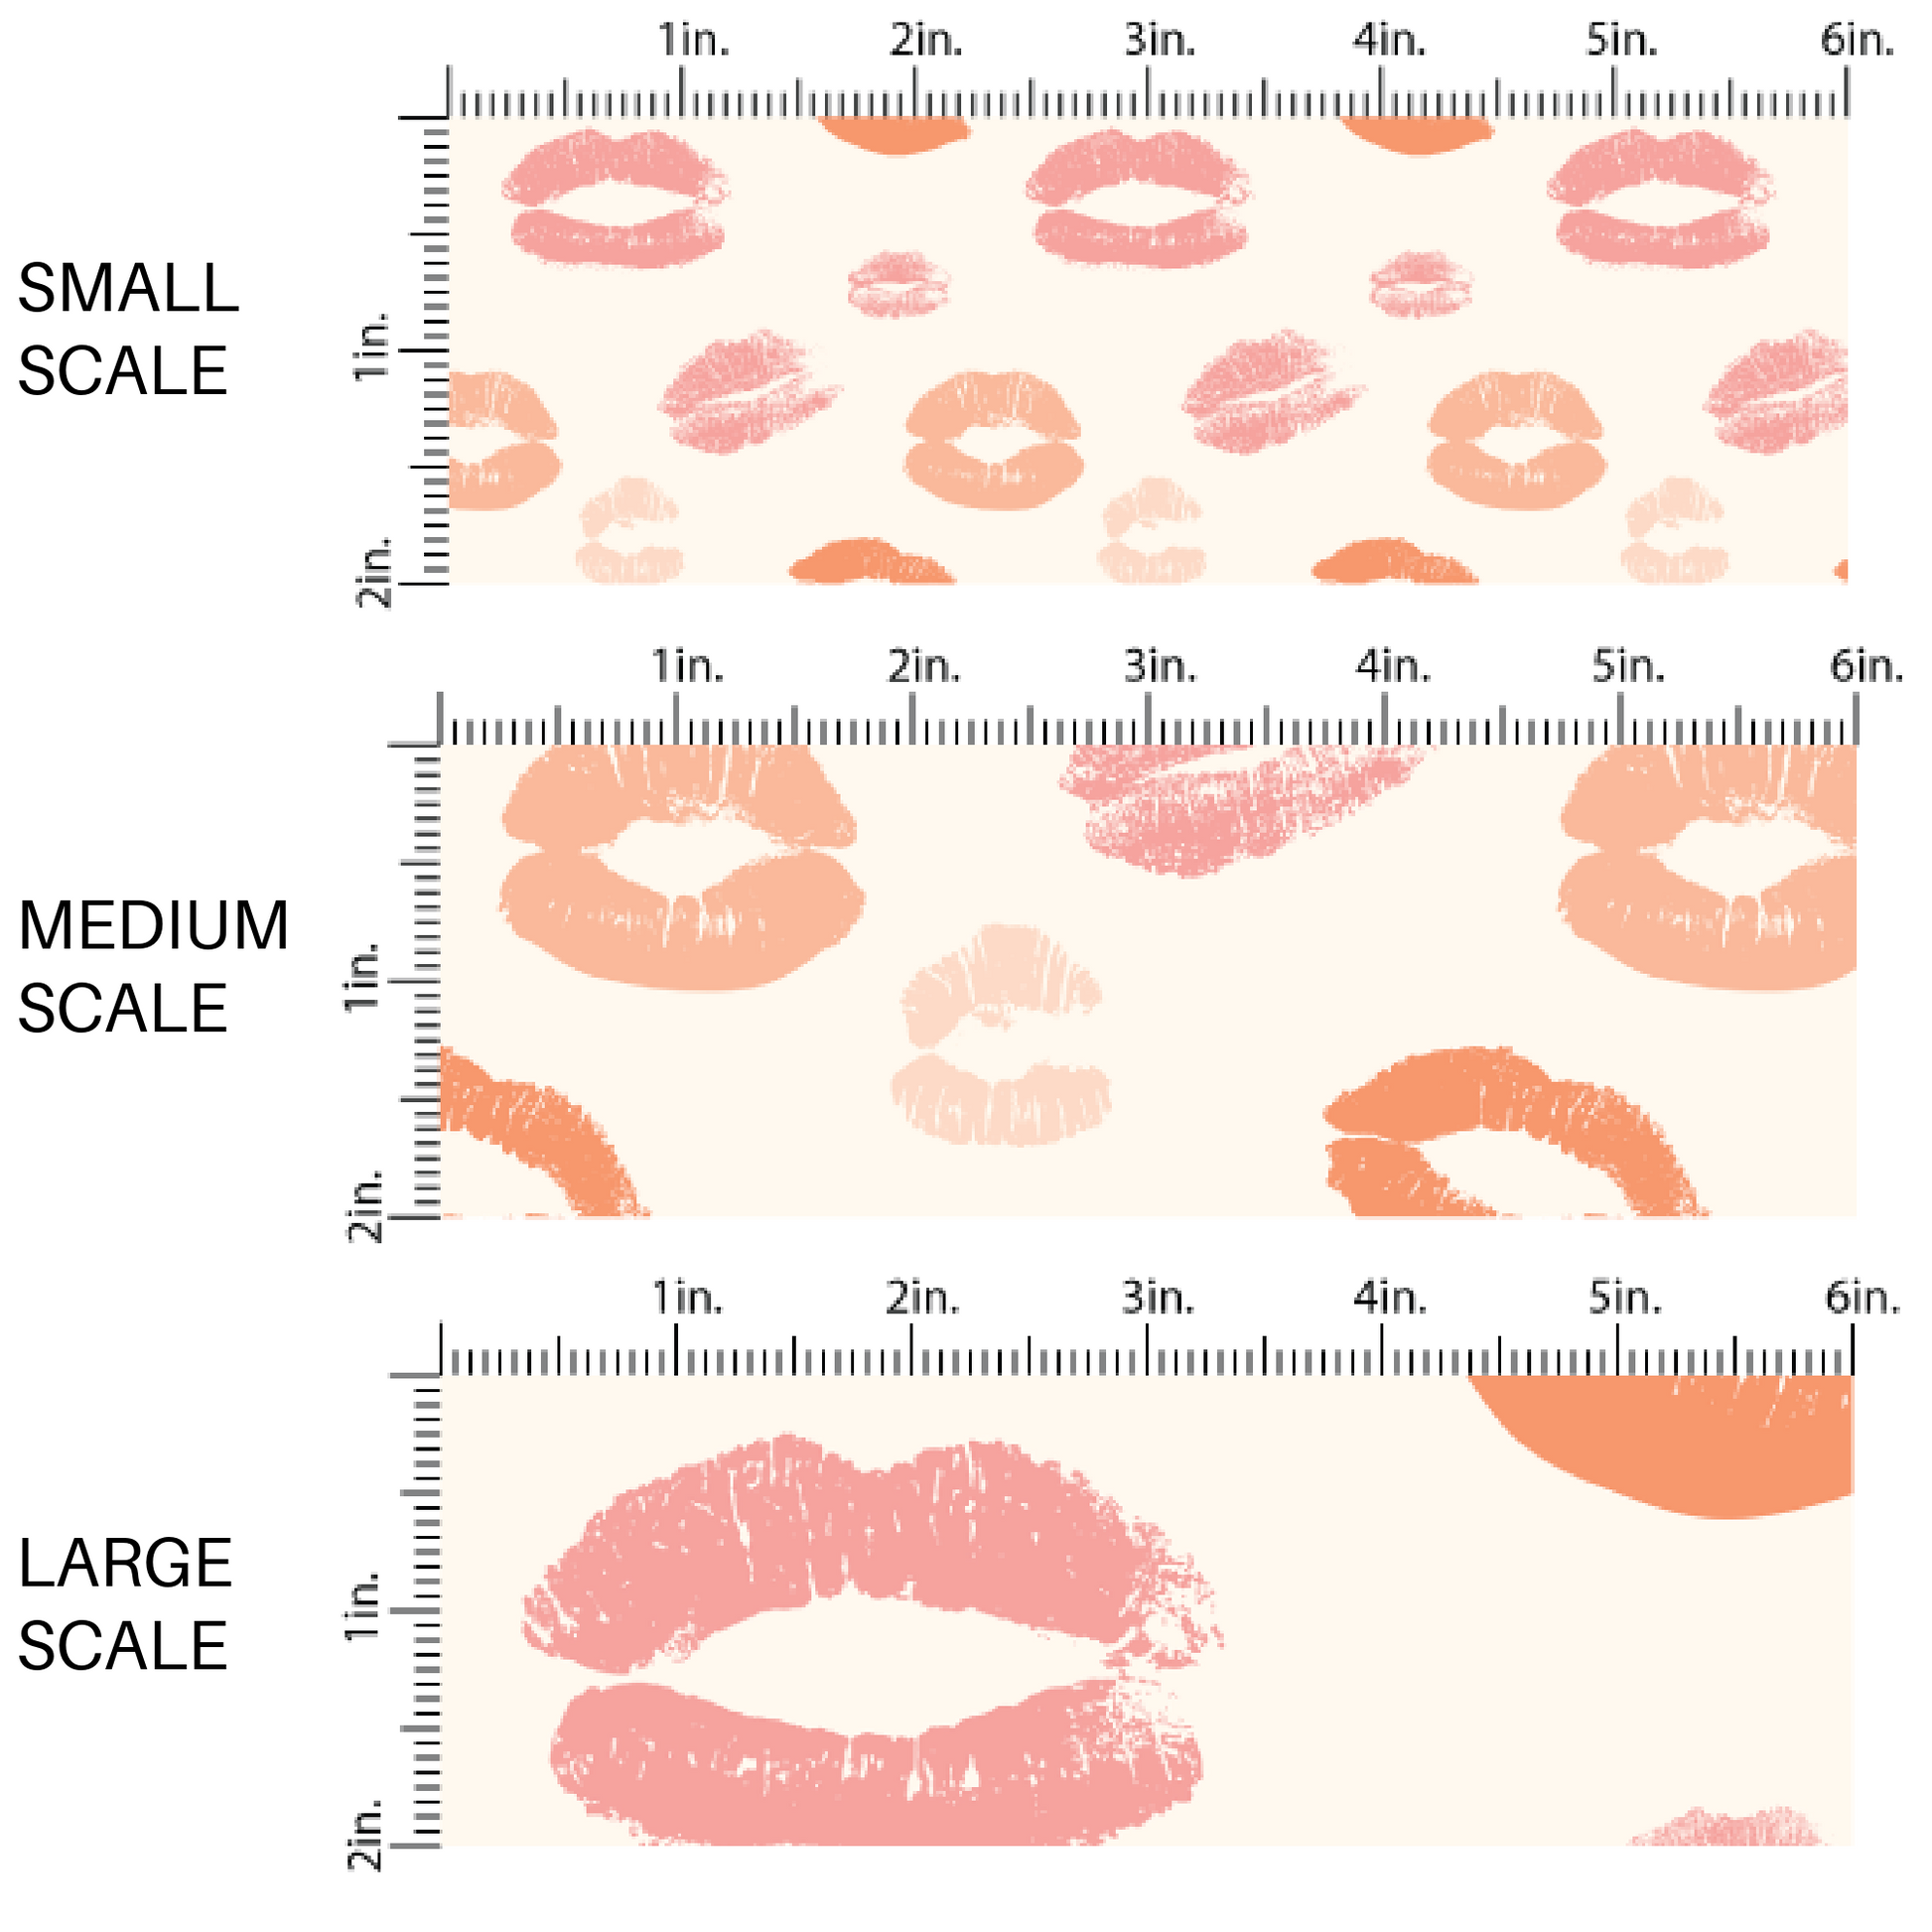 White Fabric with multi colored kiss marks image guide